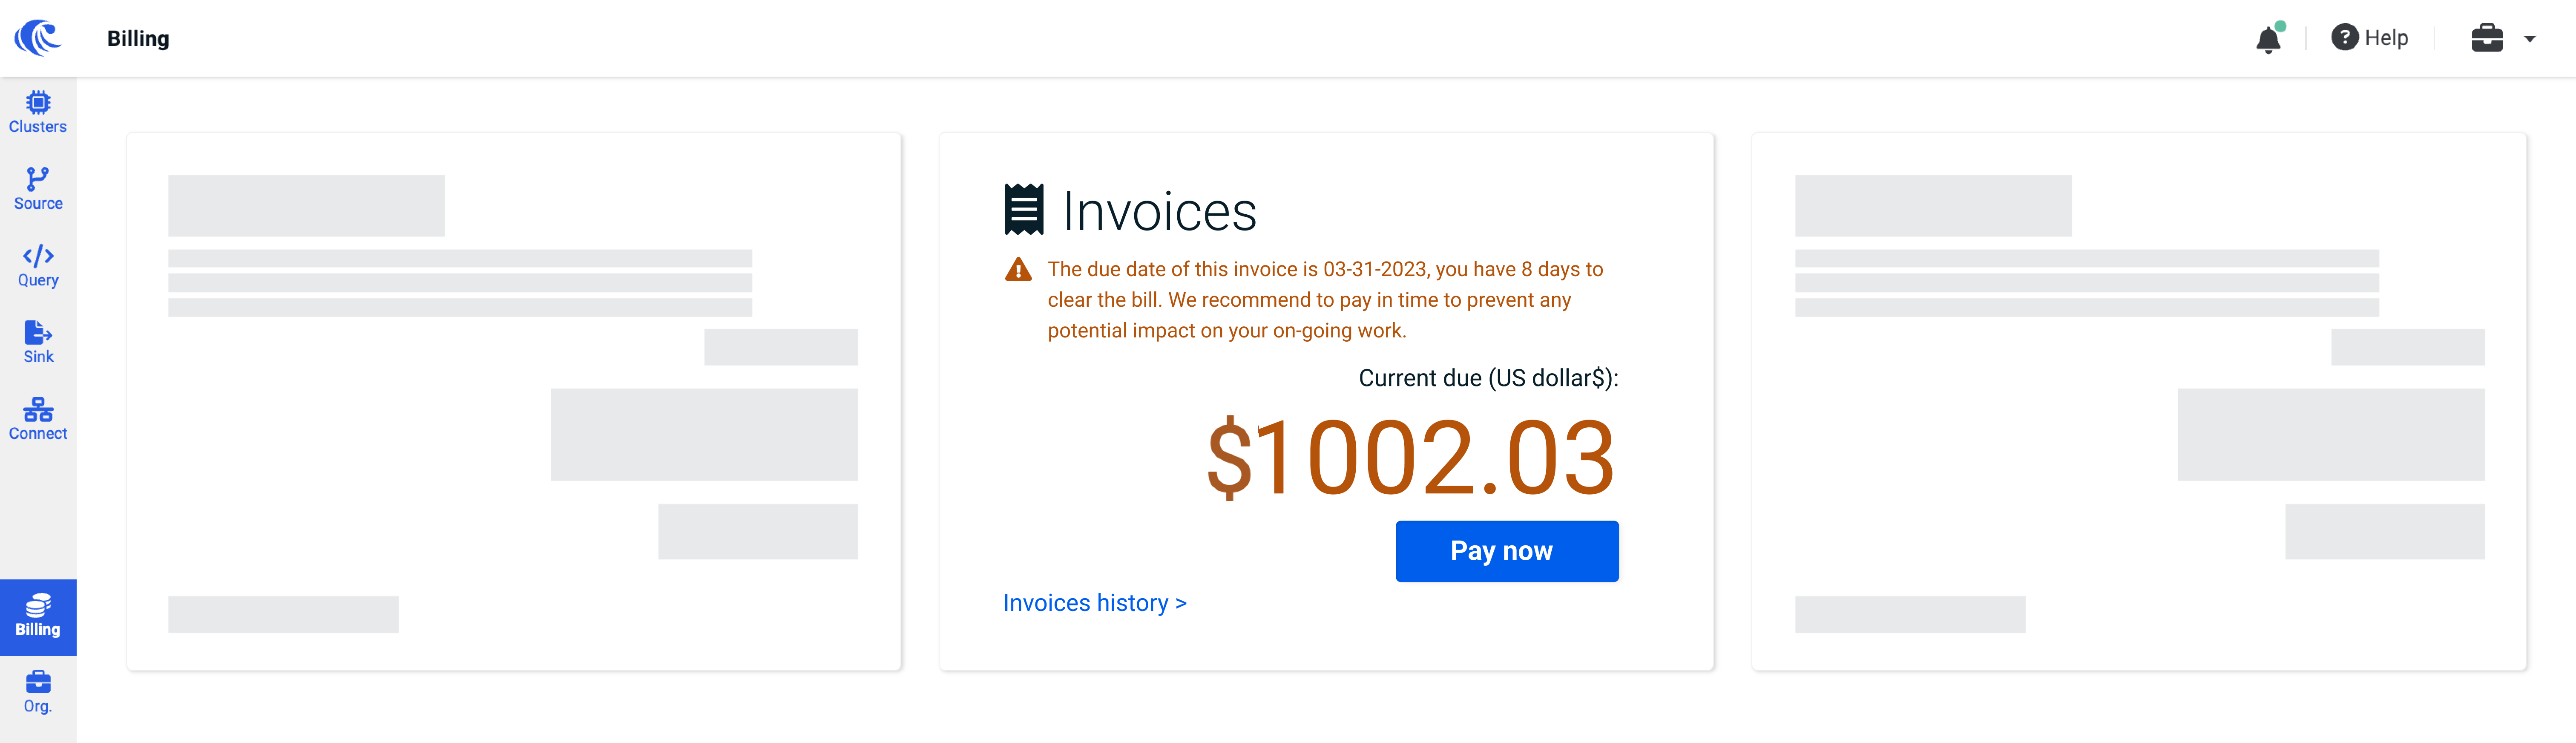 Invoices history